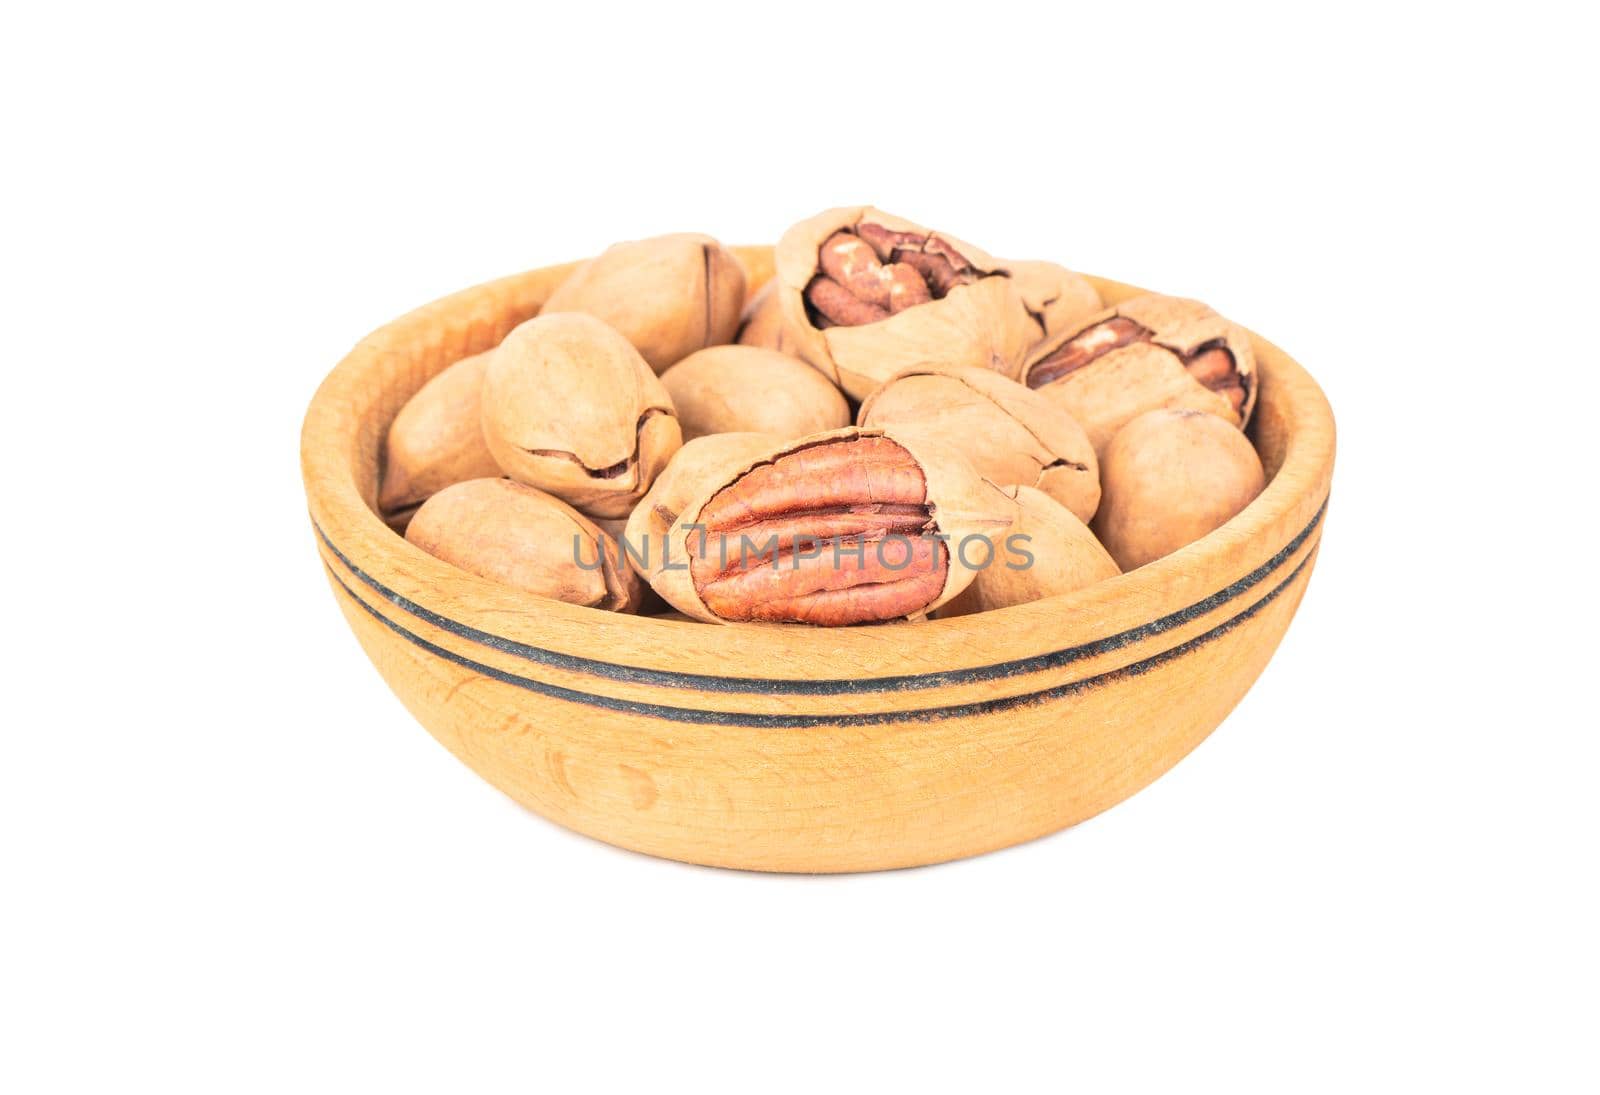 Pecan nuts in a large wooden bowl on a white background